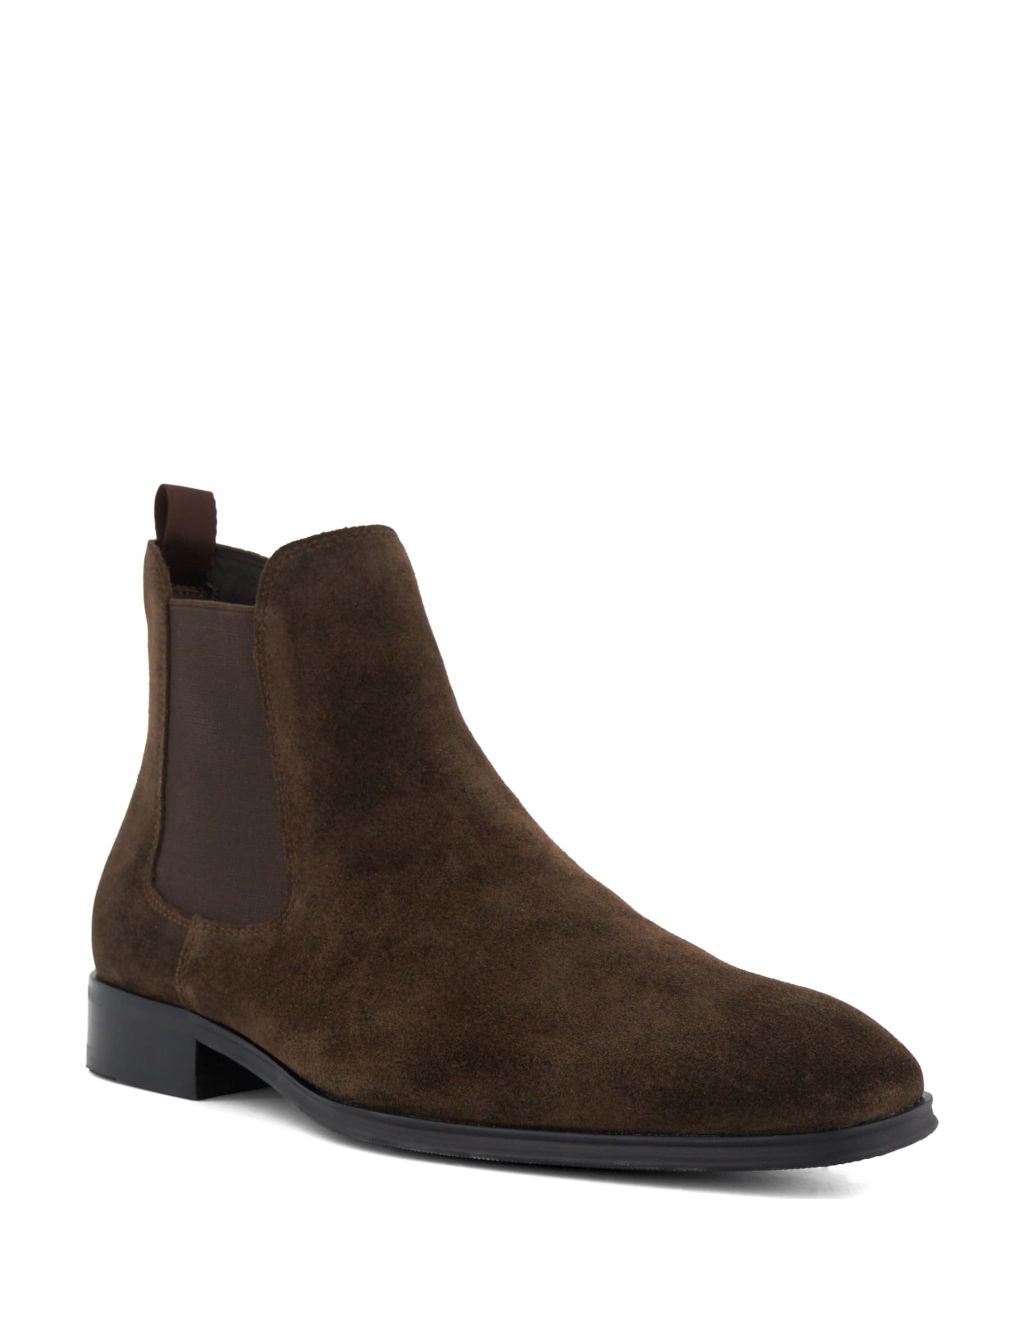 Leather Pull-On Chelsea Boots image 2